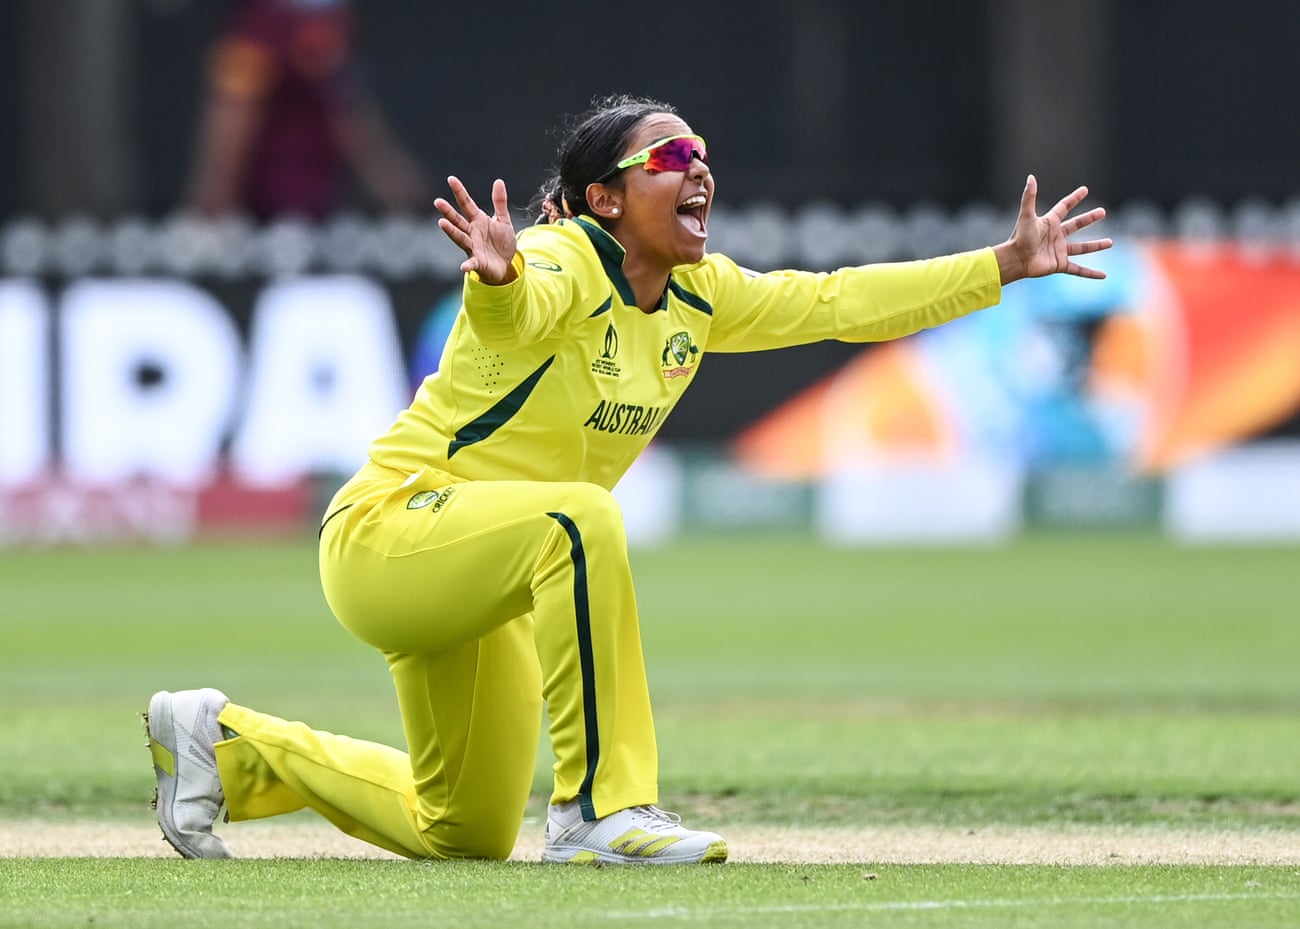 Alana King appeals during a World Cup match. Australia face West Indies on Wednesday for a spot in the weekend’s final against England or South Africa.